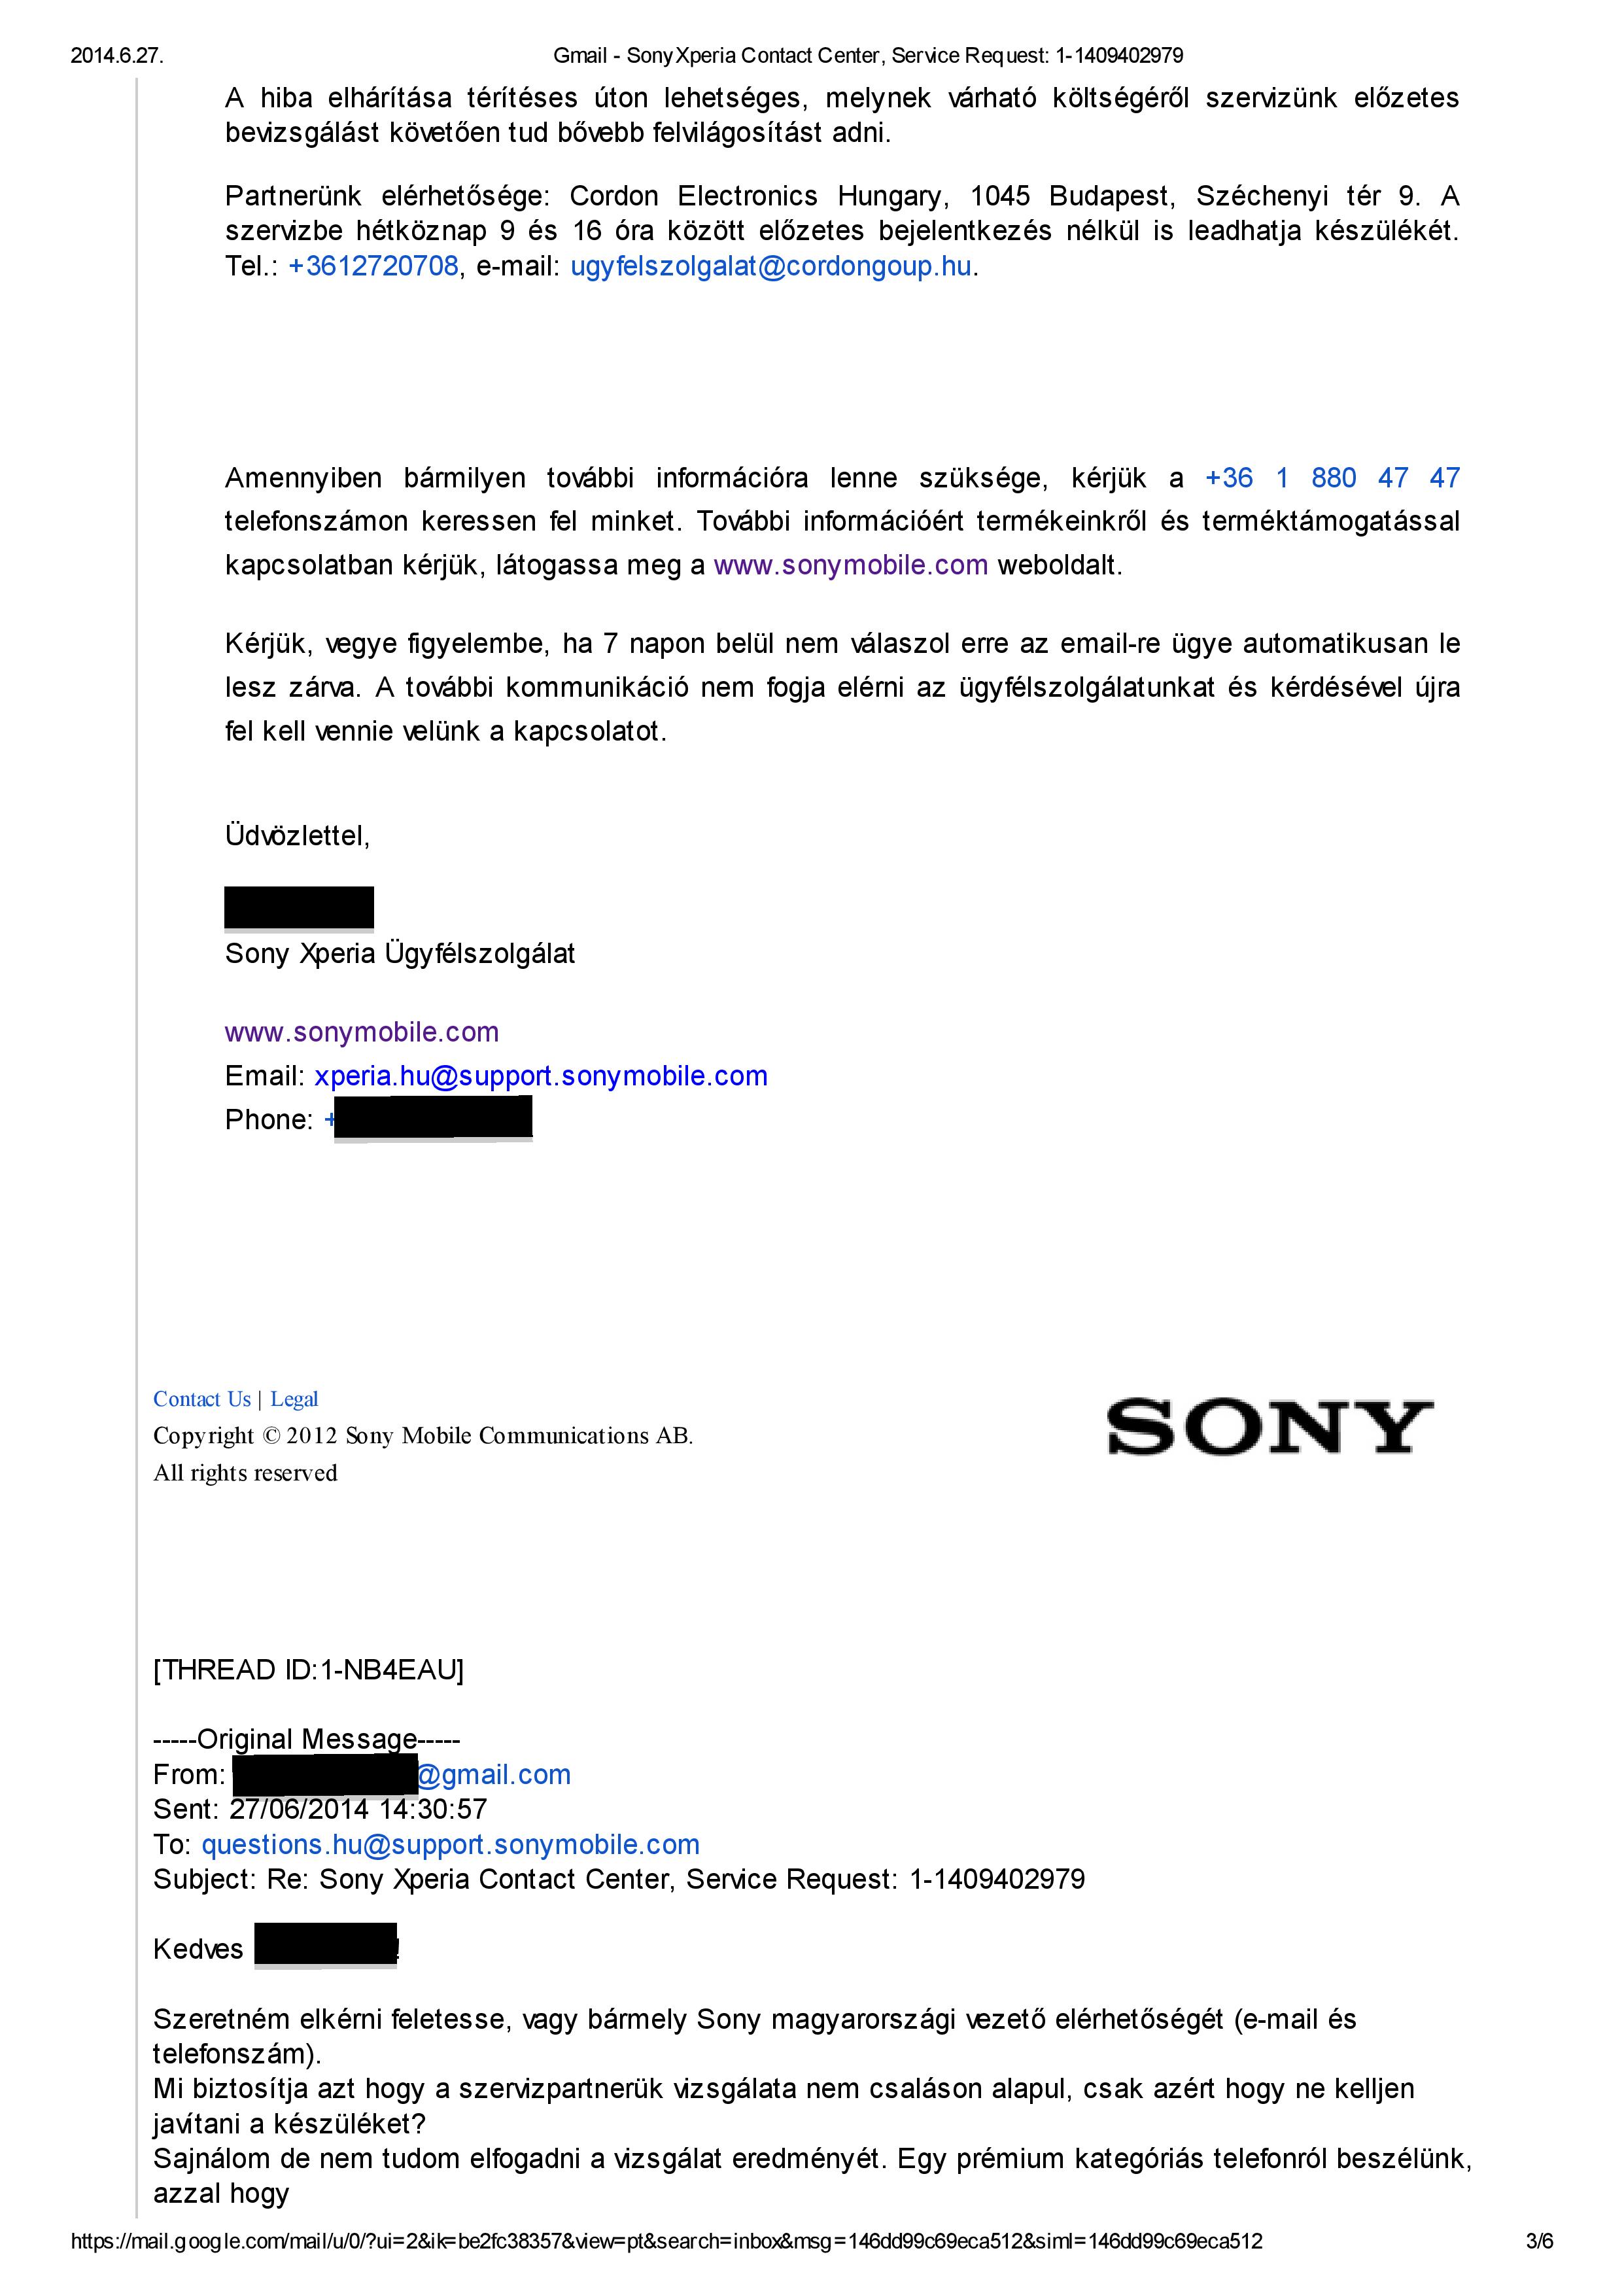 Gmail - Sony Xperia Contact Center, Service Request_ 1-1409402979-page-003 (1).jpg